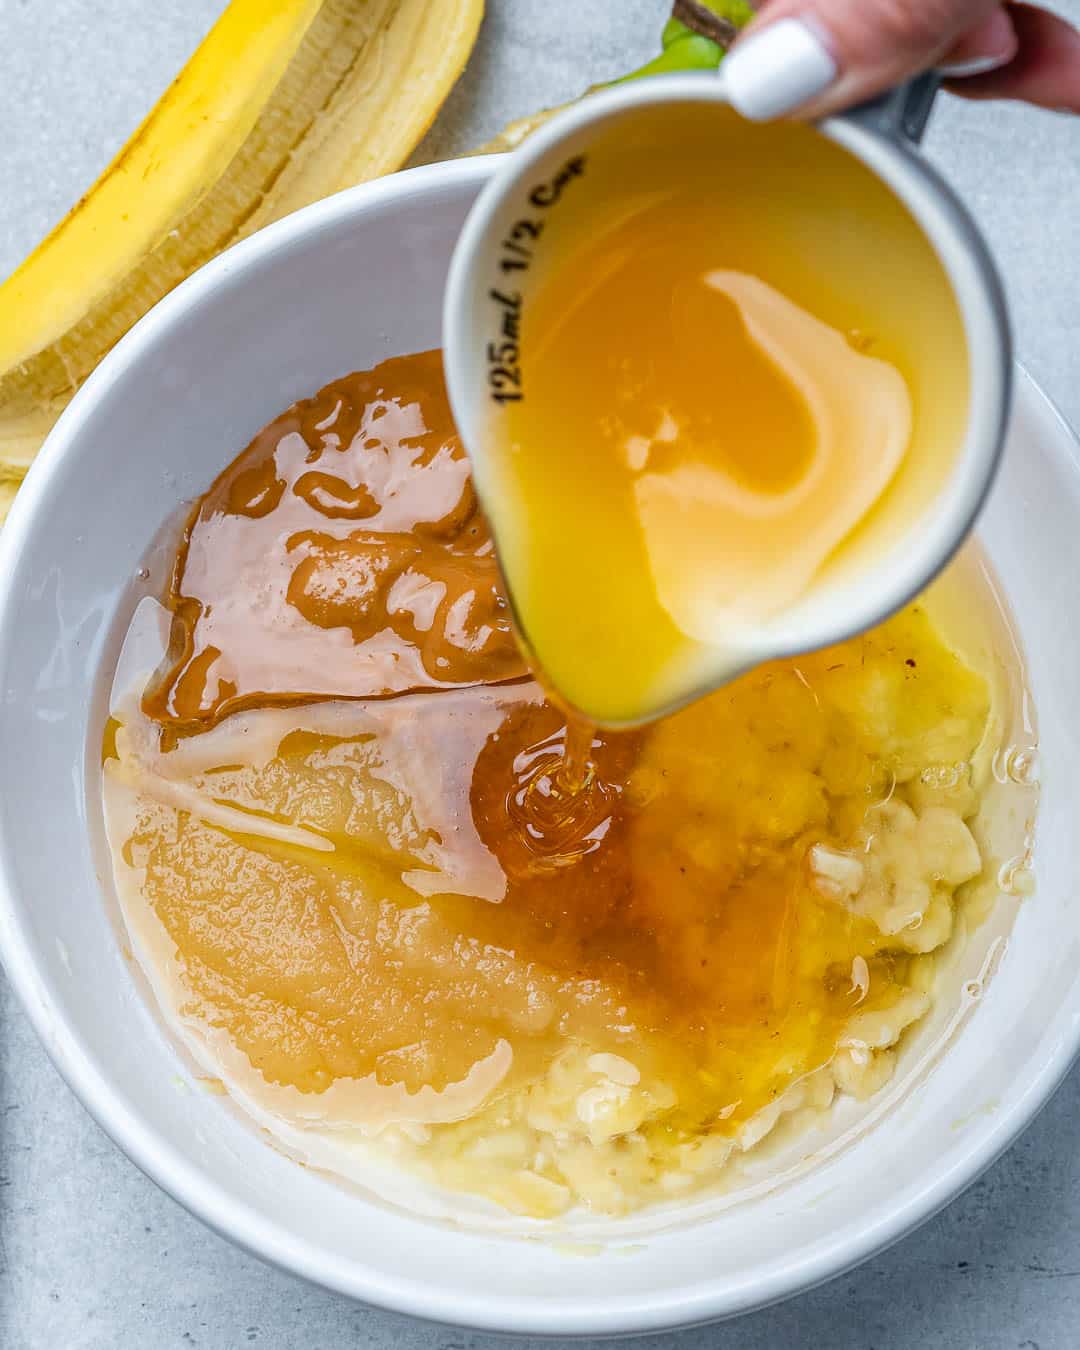 Hand pouring honey into bowl of wet ingredients for muffins.